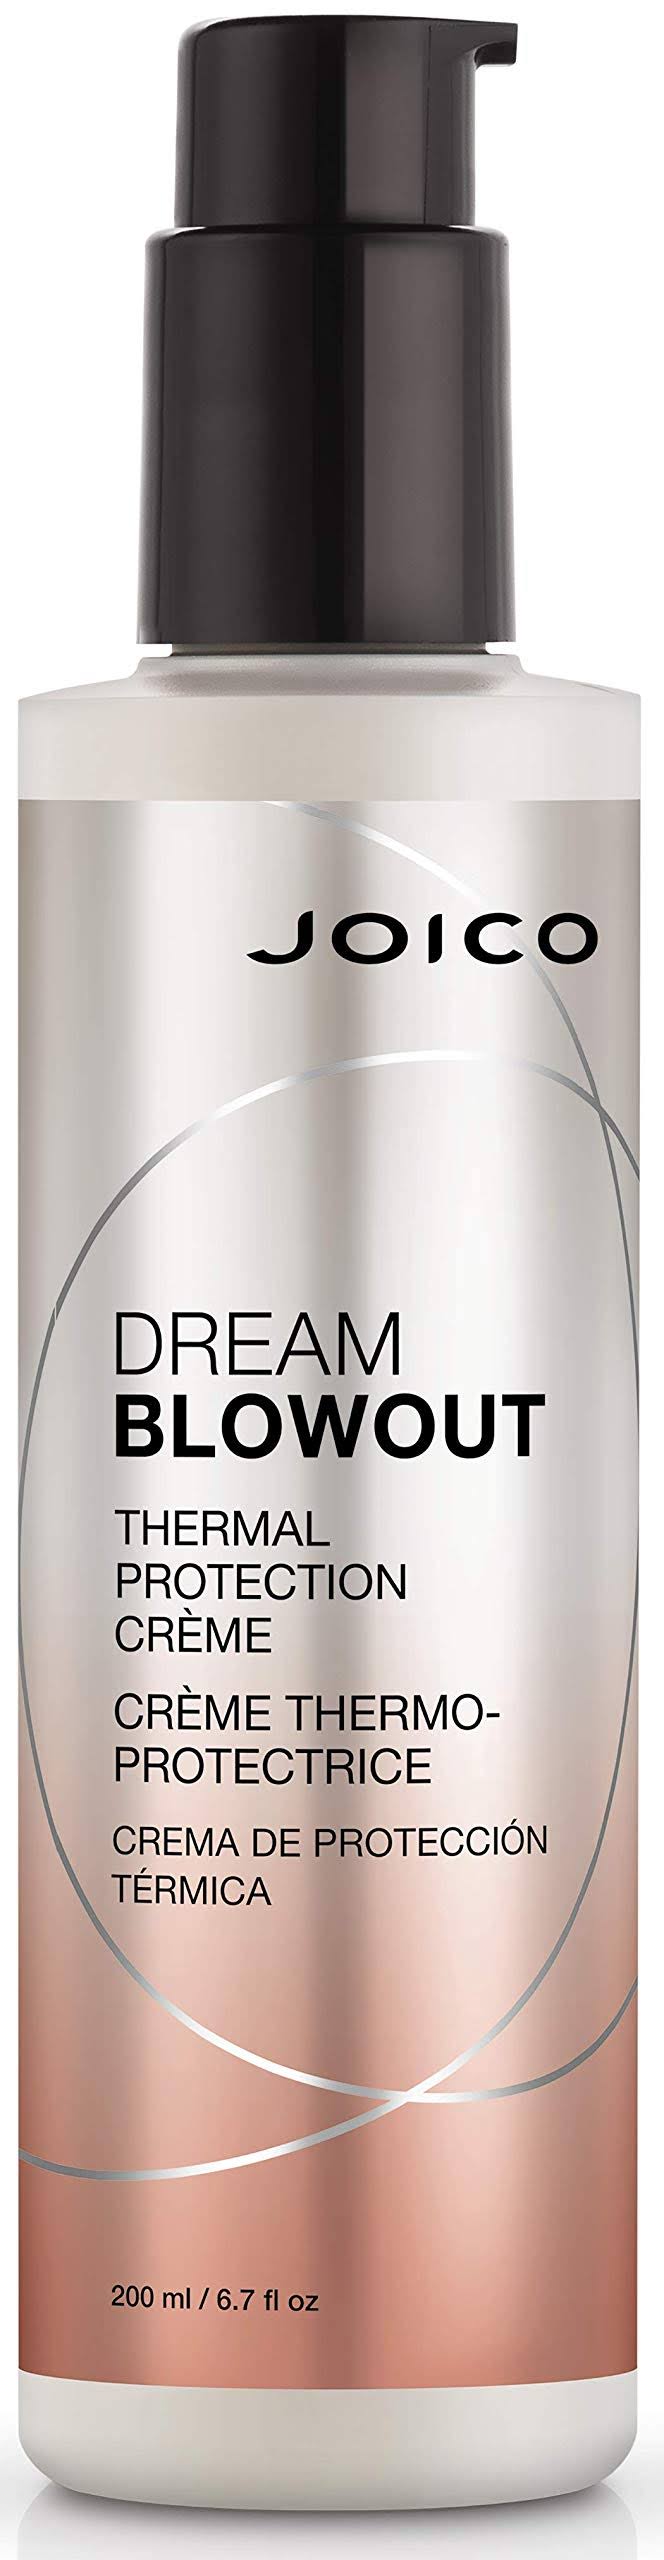 Joico Dream Blowout Thermal Protection Creme - 200ml